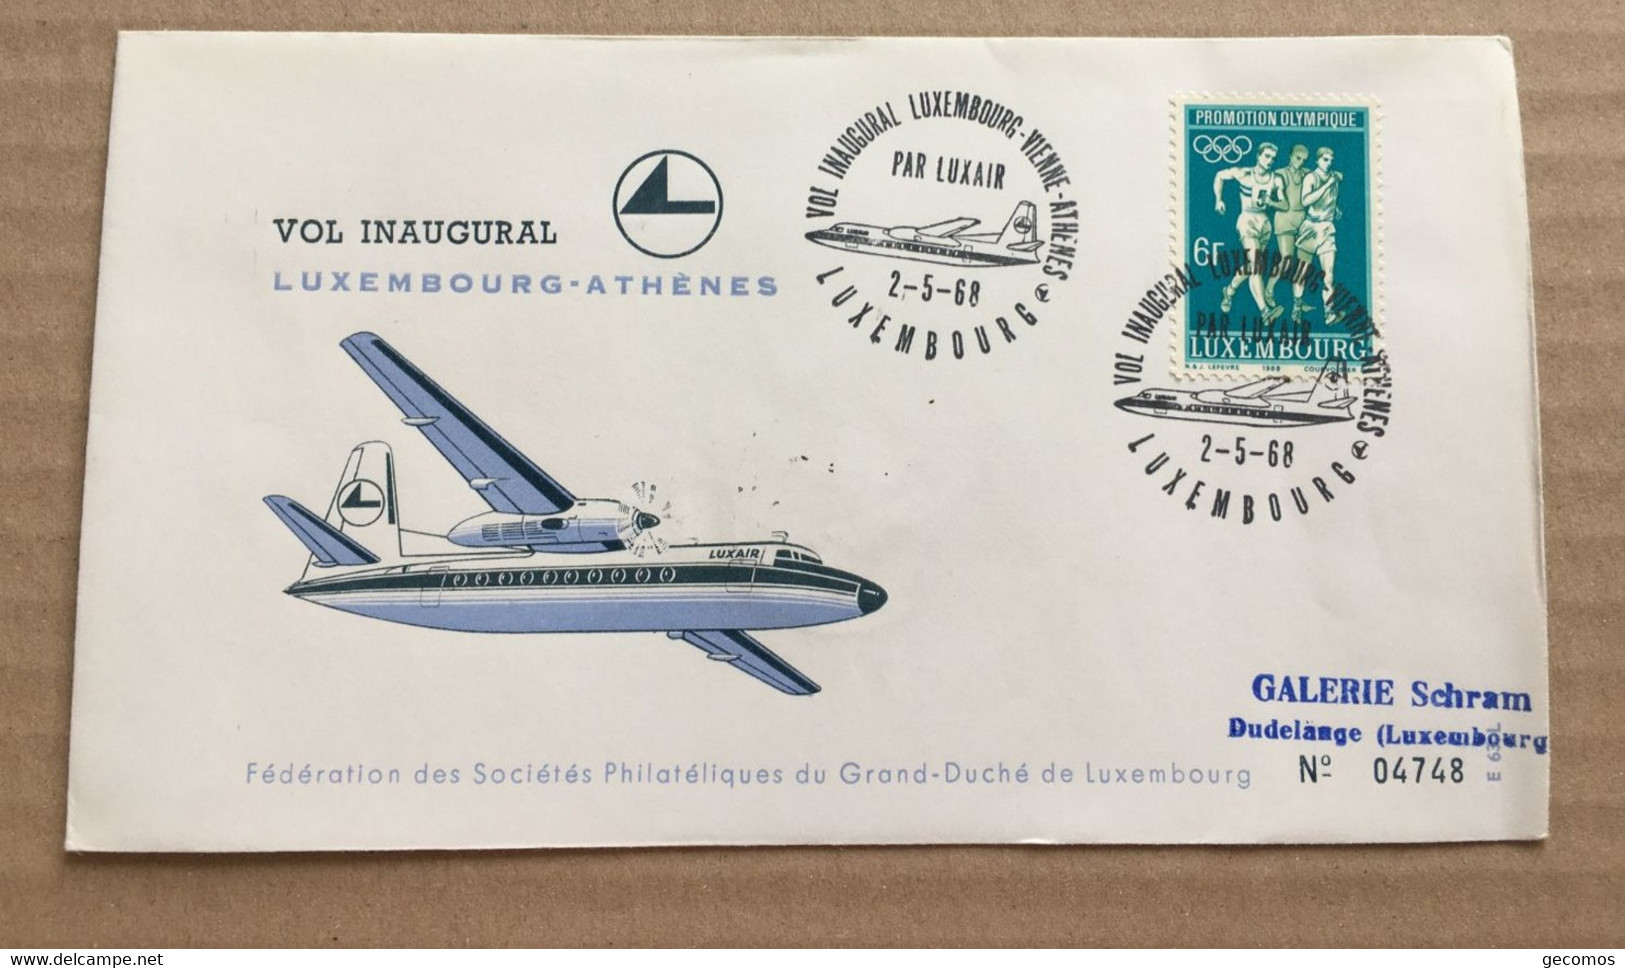 VOL INAUGURAL LUXEMBOURG-ATHENES 2-5-68 - (Avion LUXAIR) - Timbre Promotion Olympique LUXEMBOURG. - Brieven En Documenten